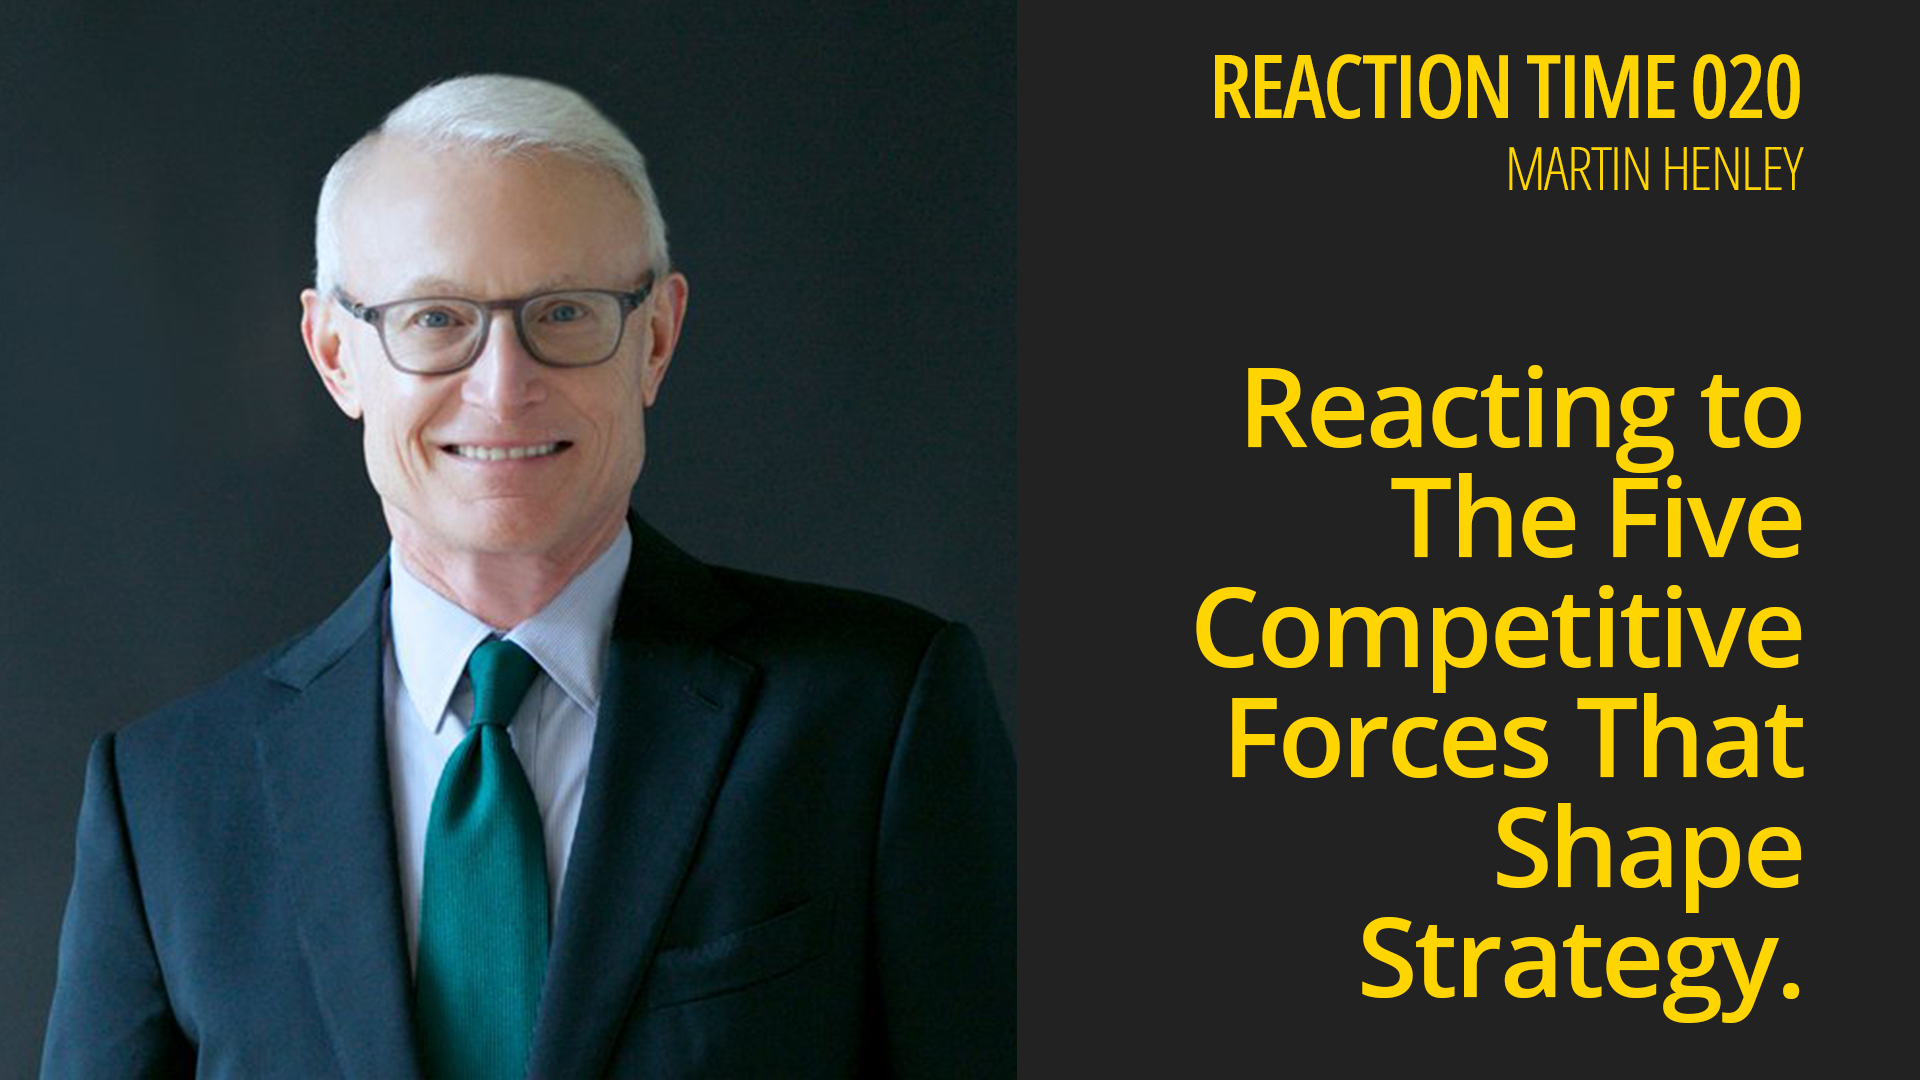 Reacting to The Five Competitive Forces That Shape Strategy – Reaction Time 020